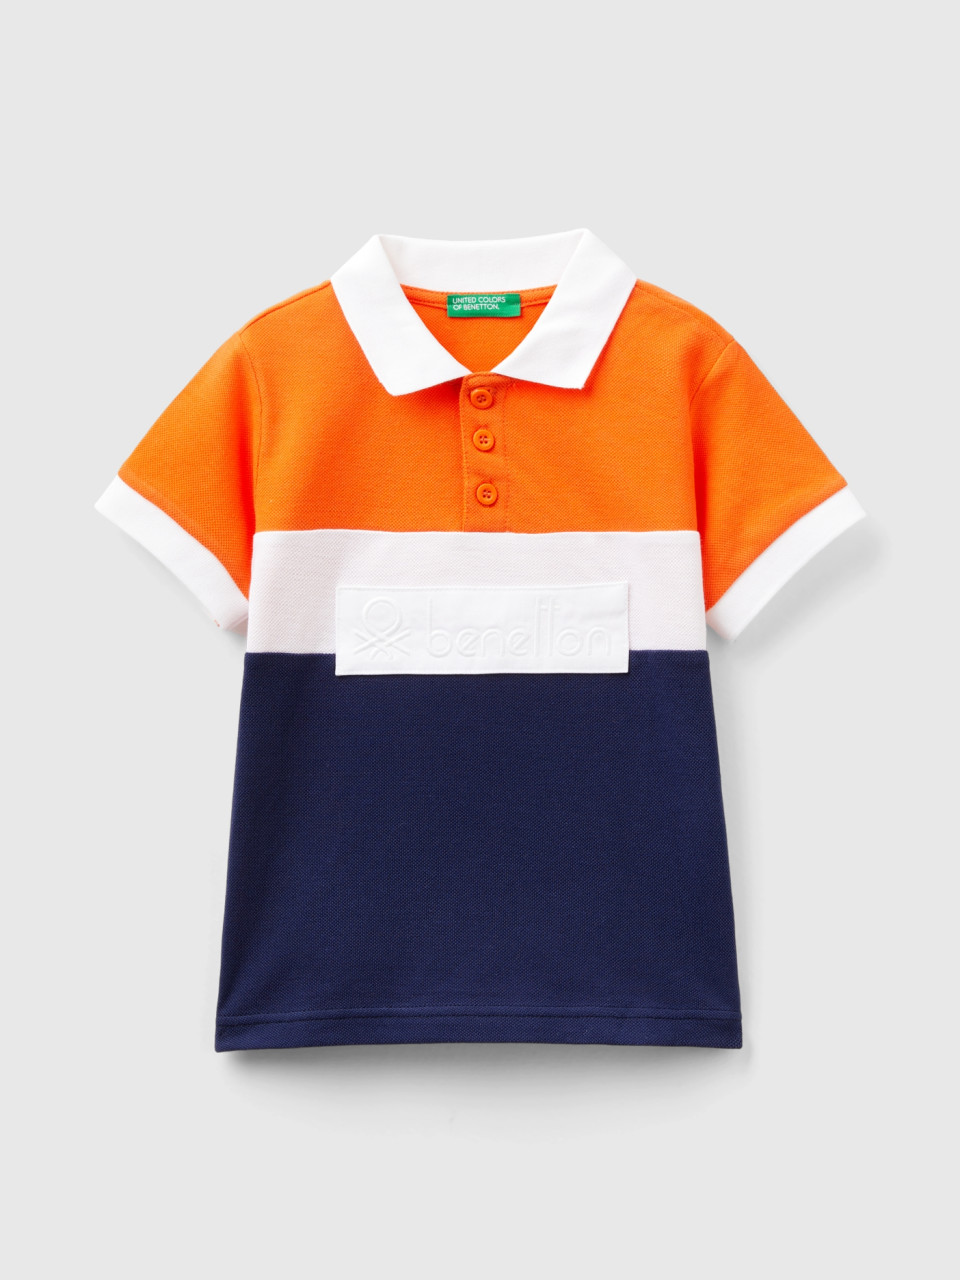 Benetton, Color Block Polo Shirt With Patch, Orange, Kids